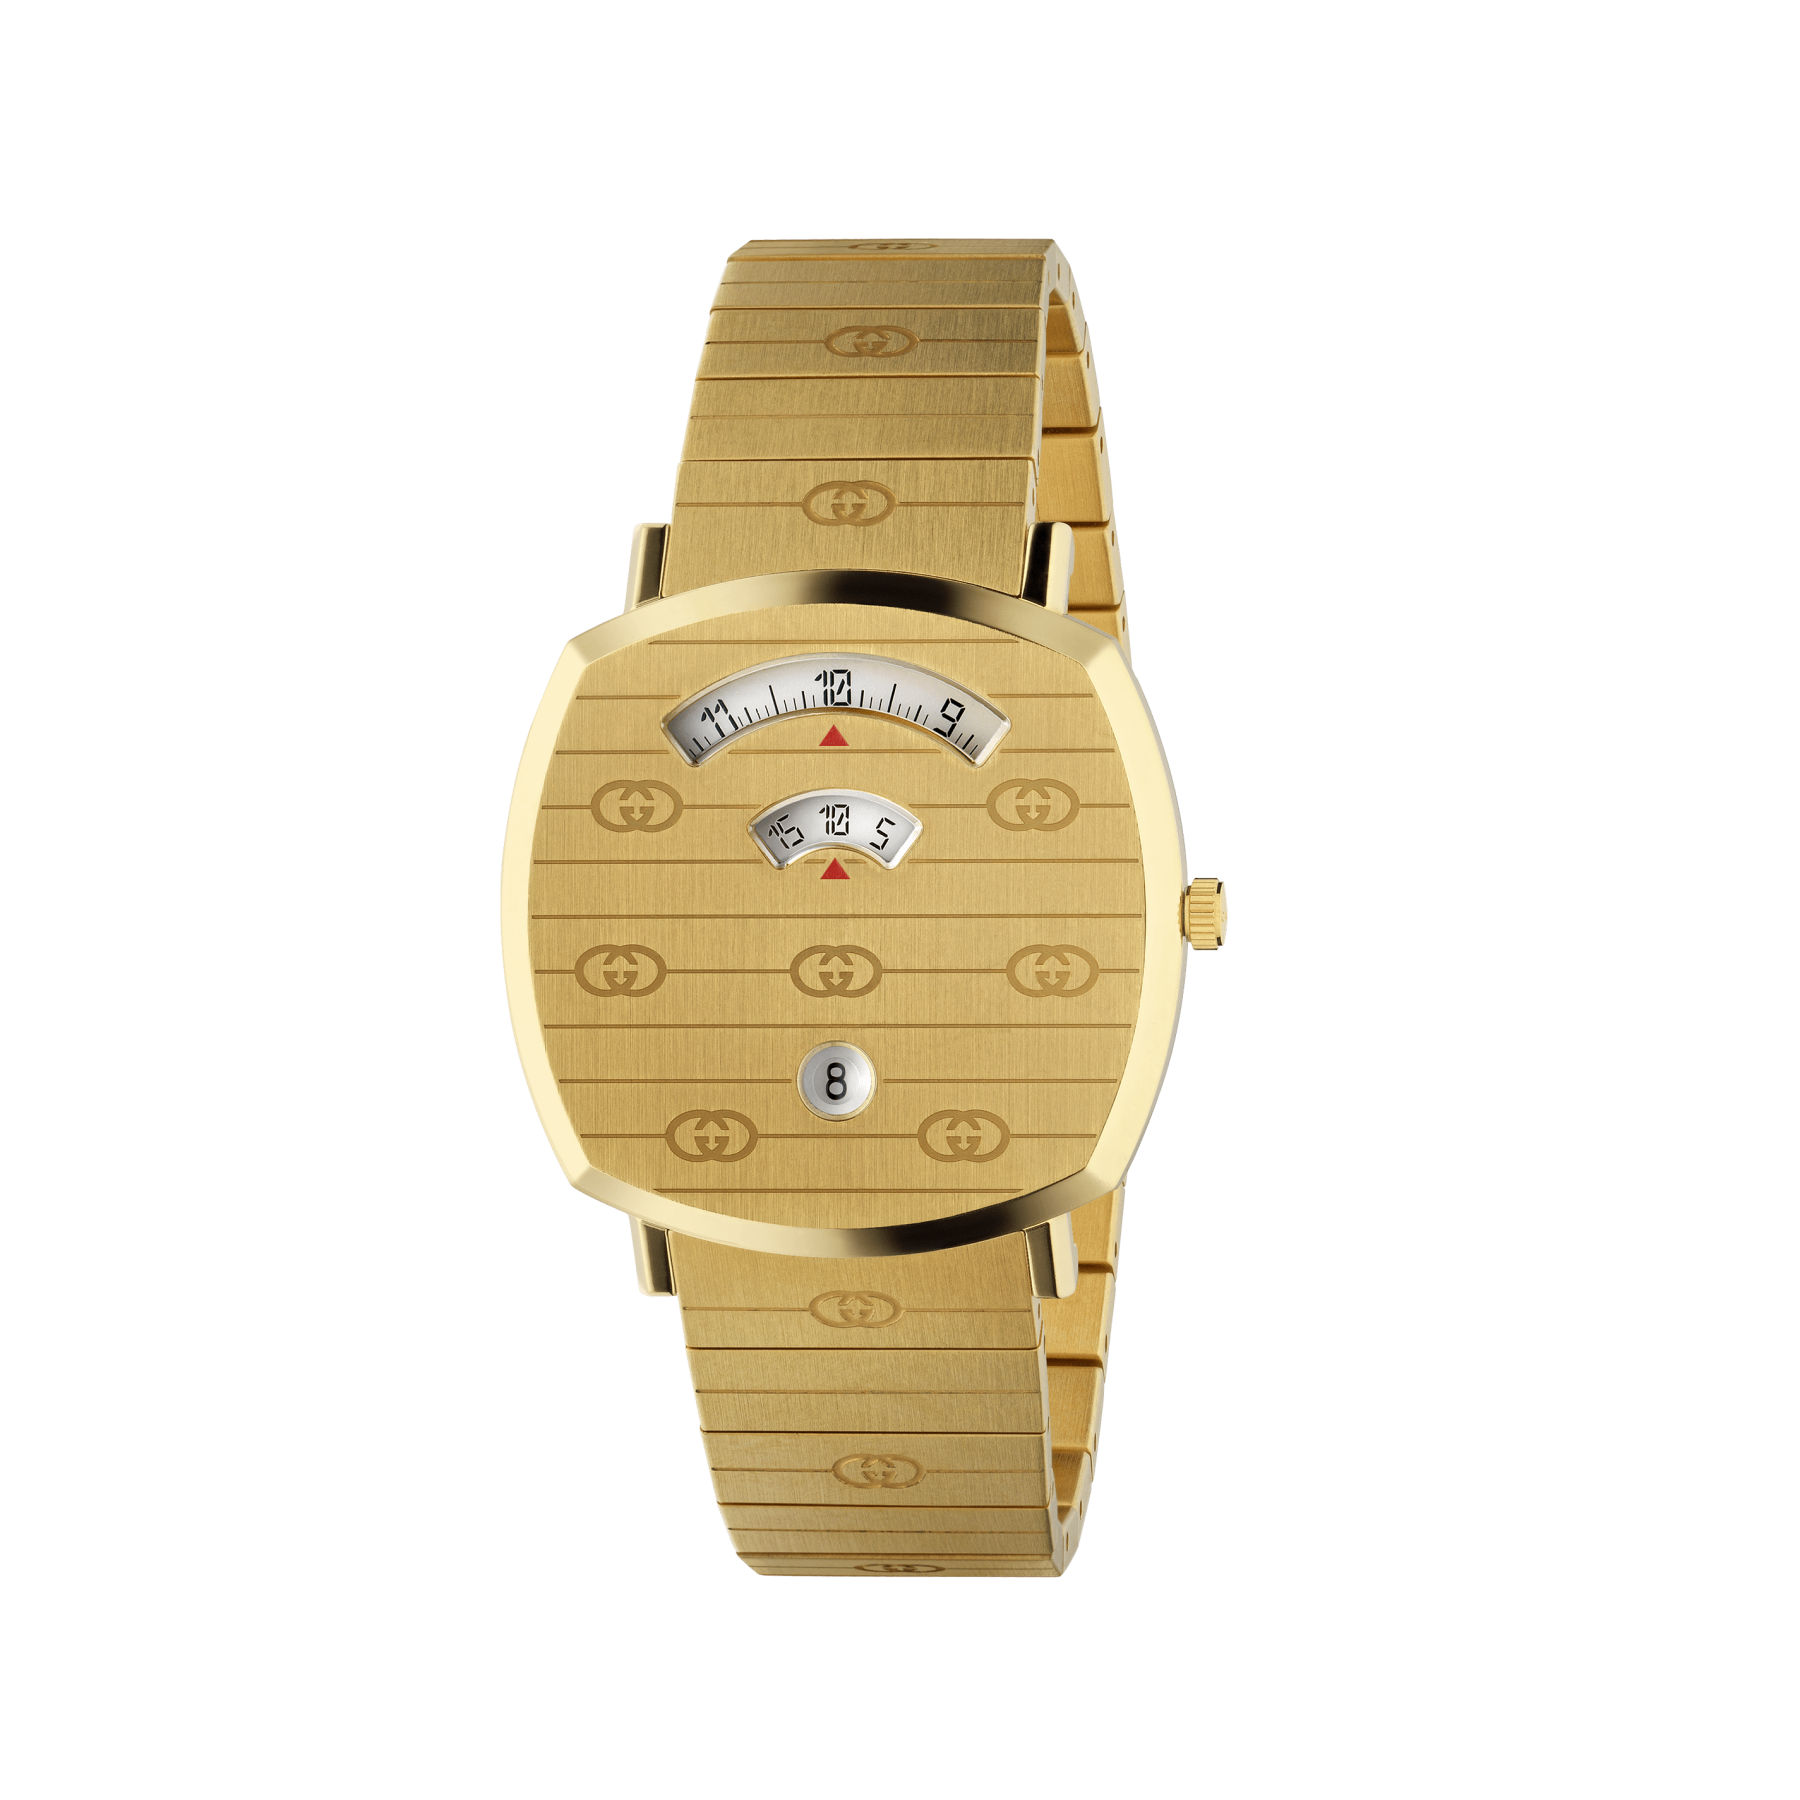 Gucci Grip 38mm Yellow Gold Watch front view